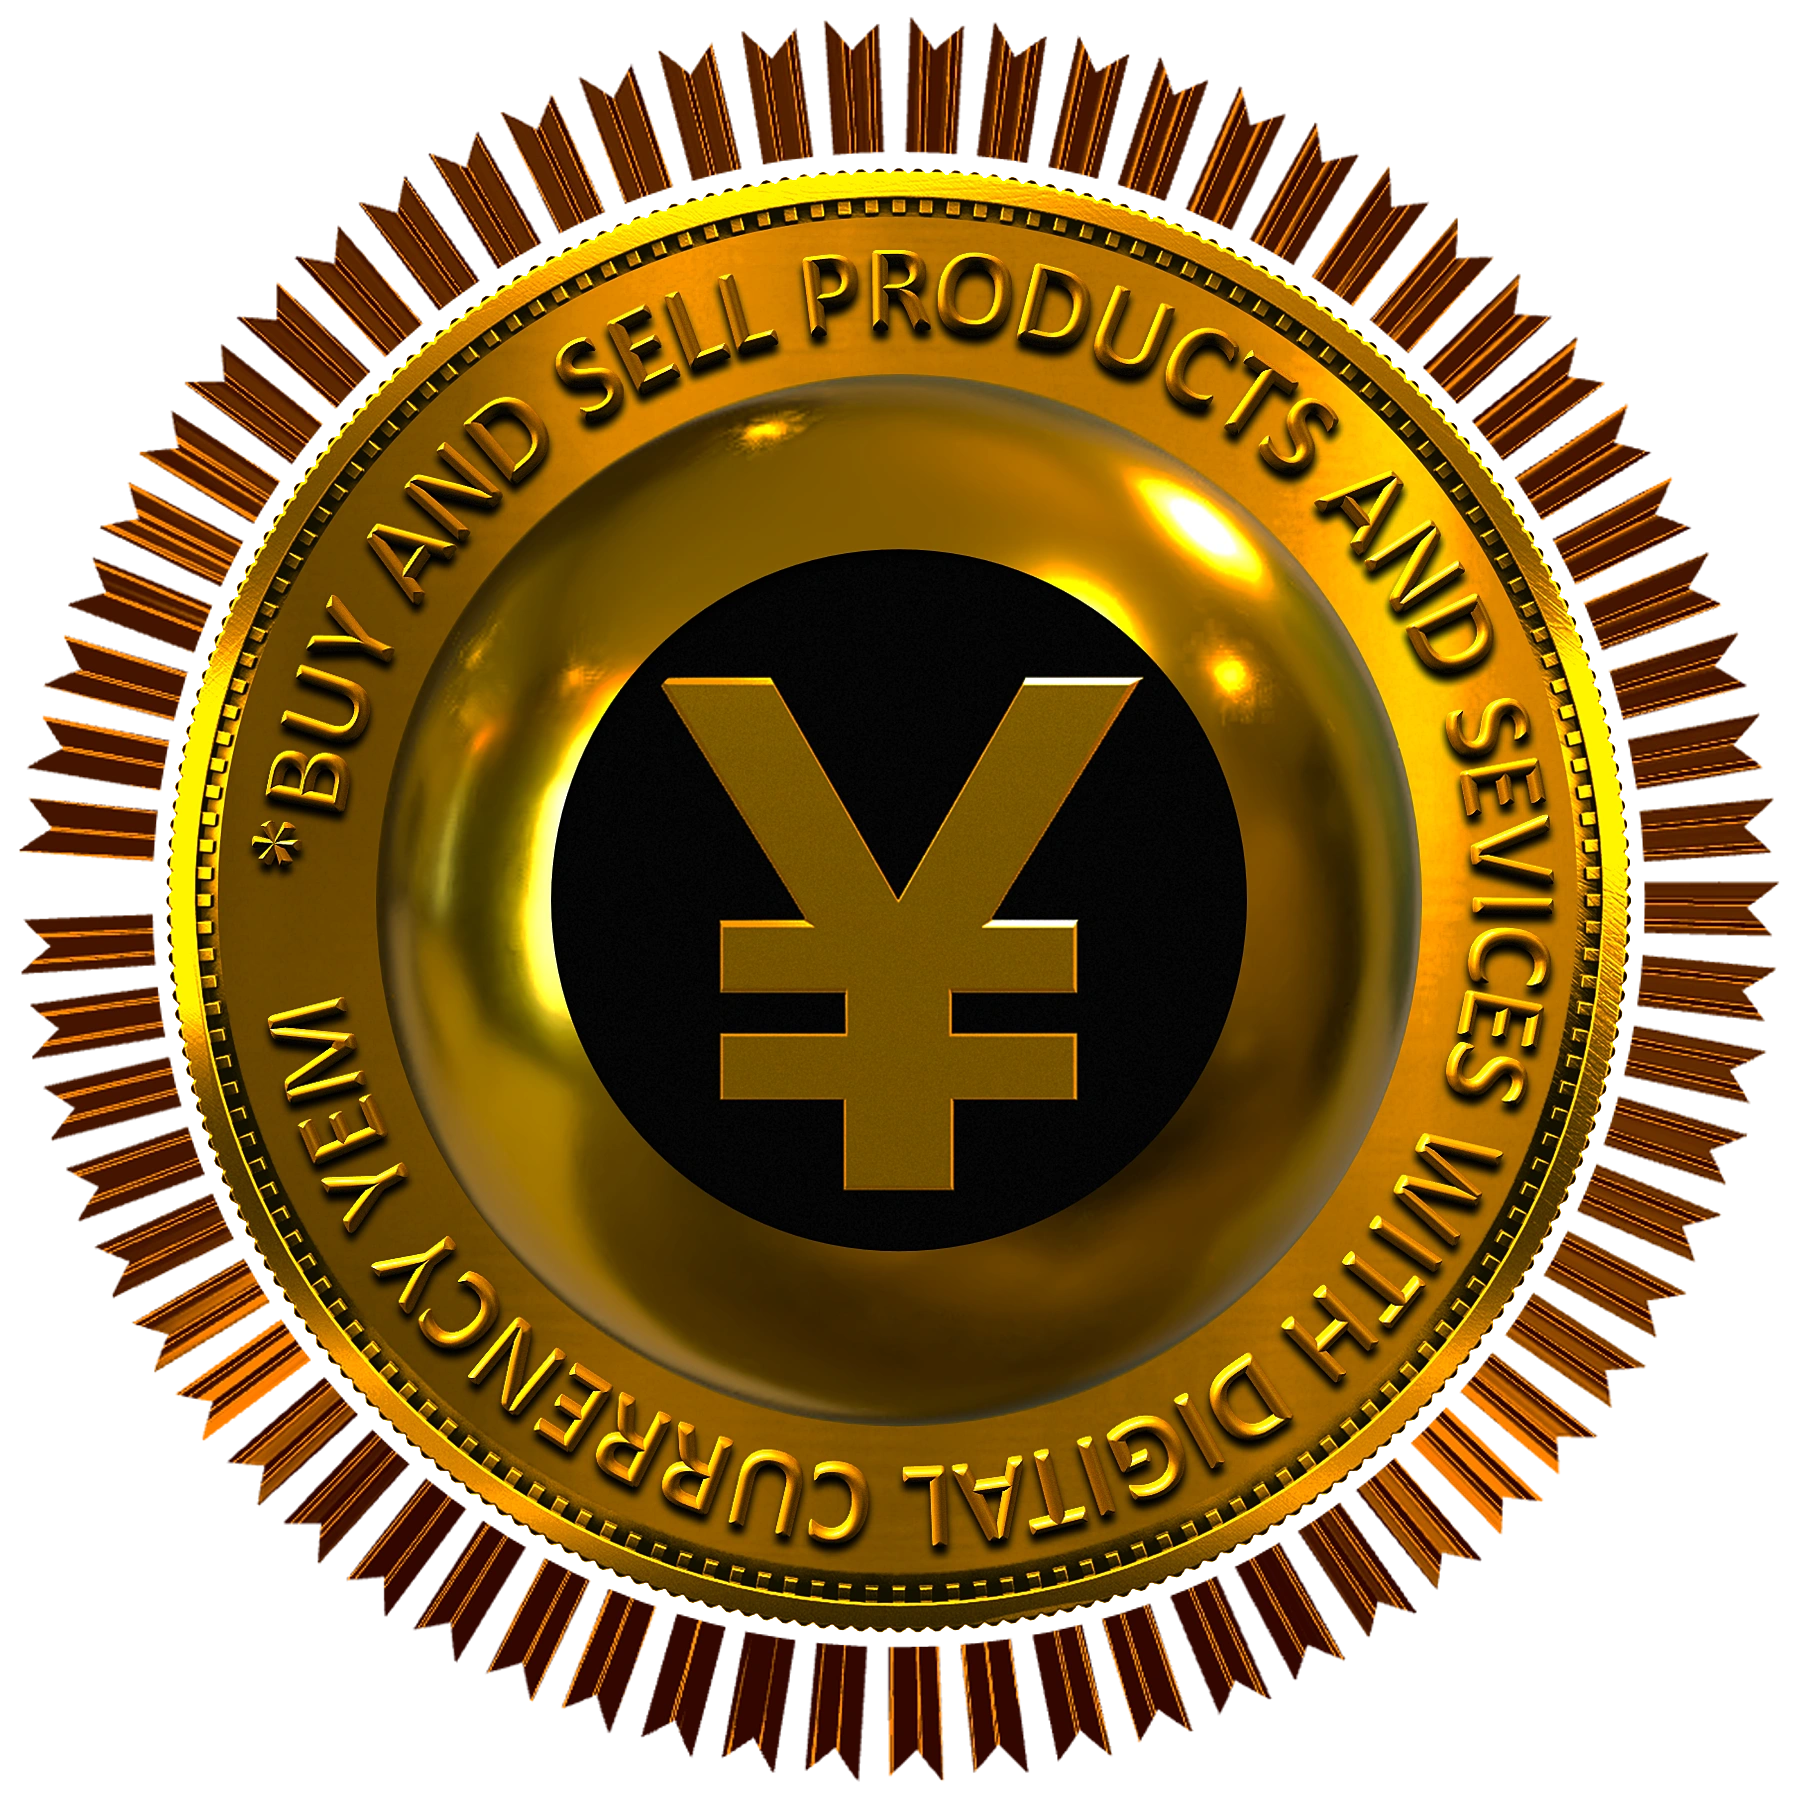 ¥ YEM Digital Currency is the preferred currency in the Unicorn Network SafeZone, Find out more.